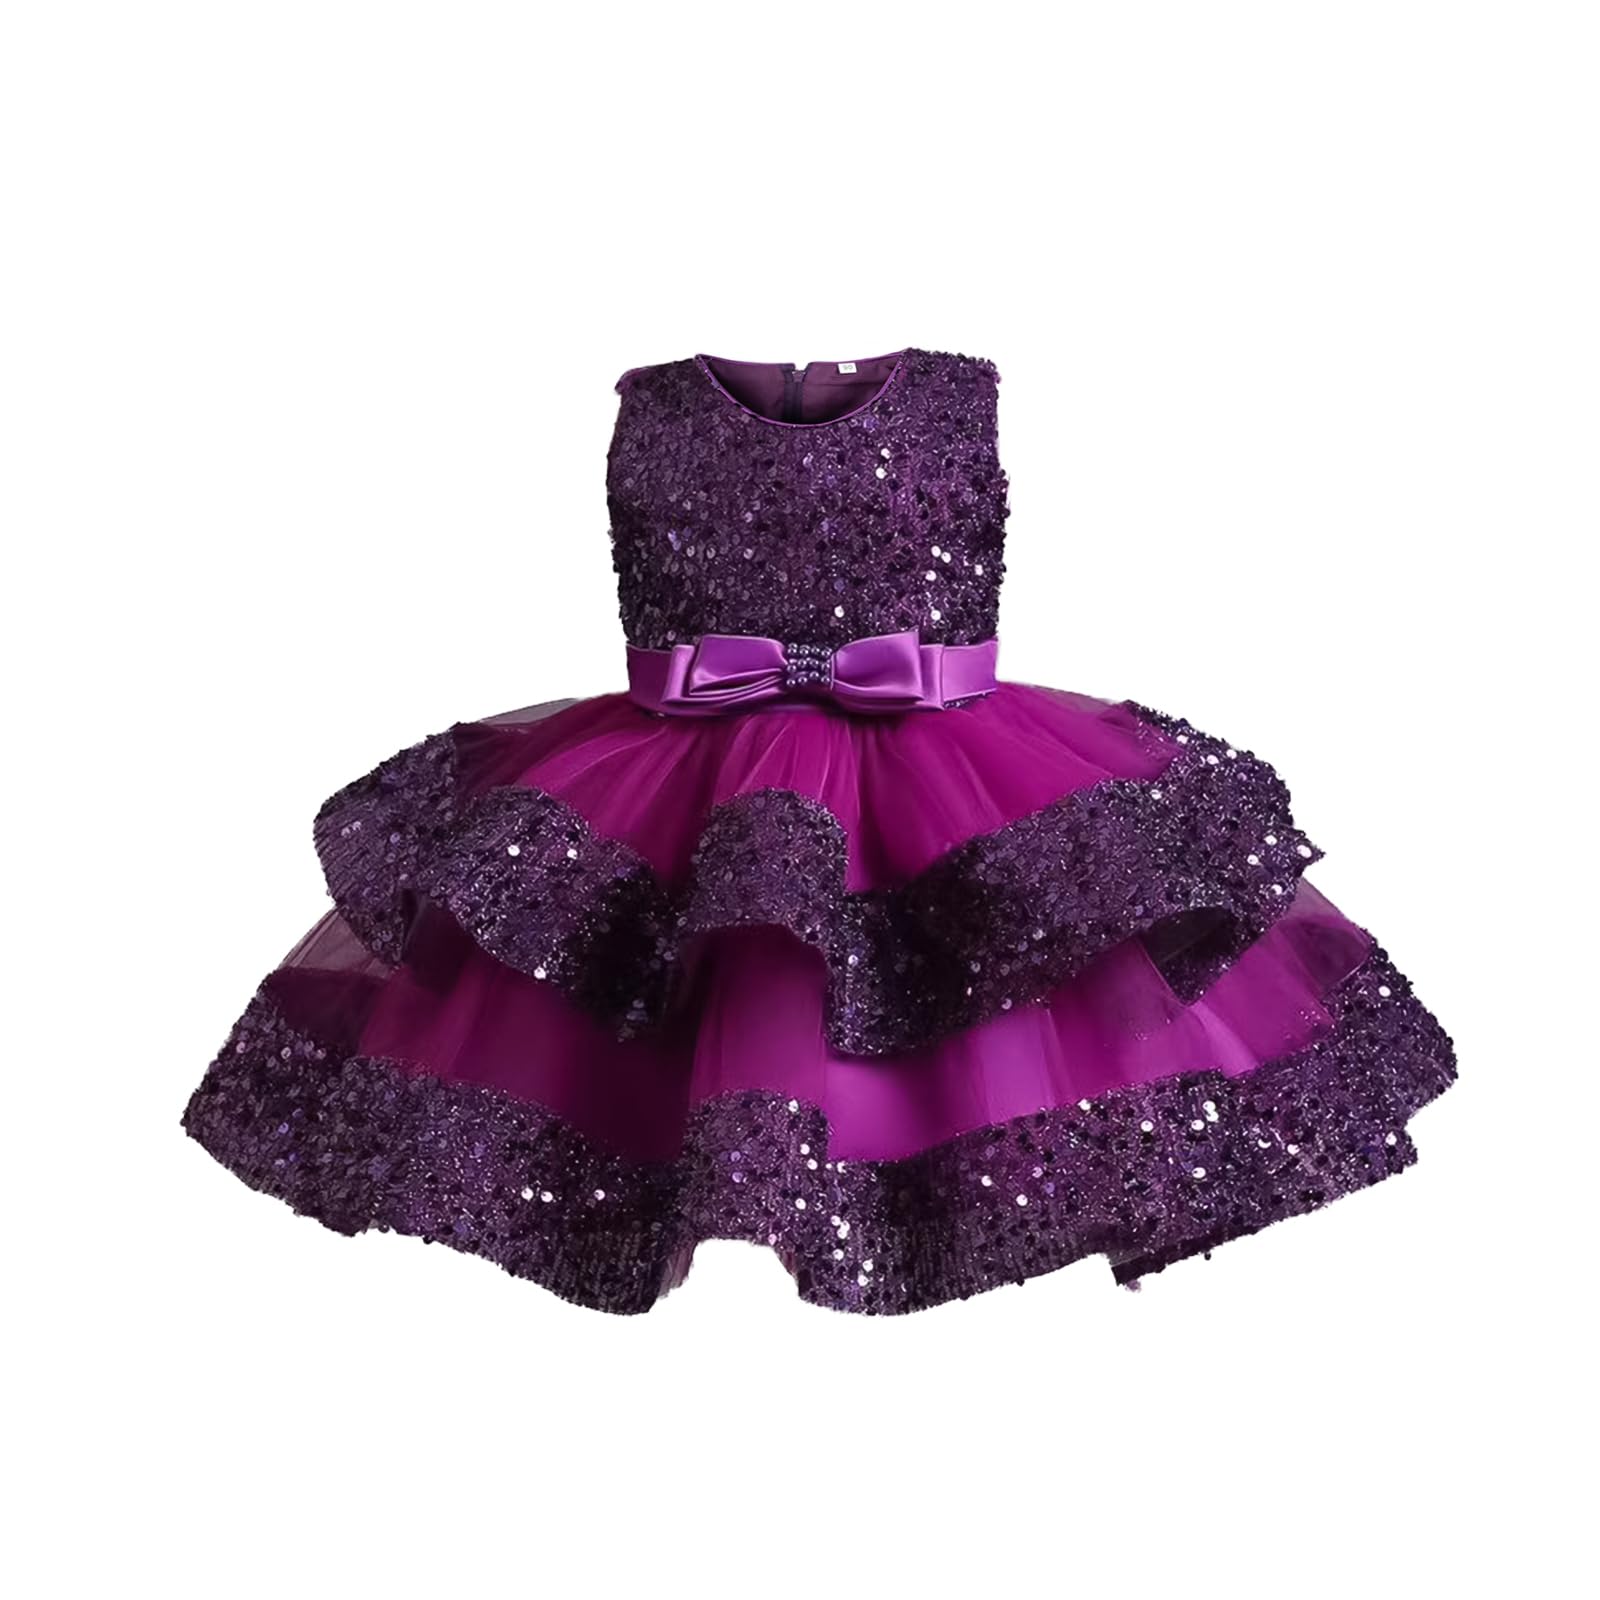 Girls Party Dress Christening Formal Wedding Birthday Dresses 5-6 Years  Toddler Girls Solid Color Pearl Embroidery Bowknot Birthday Party Flowers  Gown Kids Dresses Hot Pink - Walmart.com